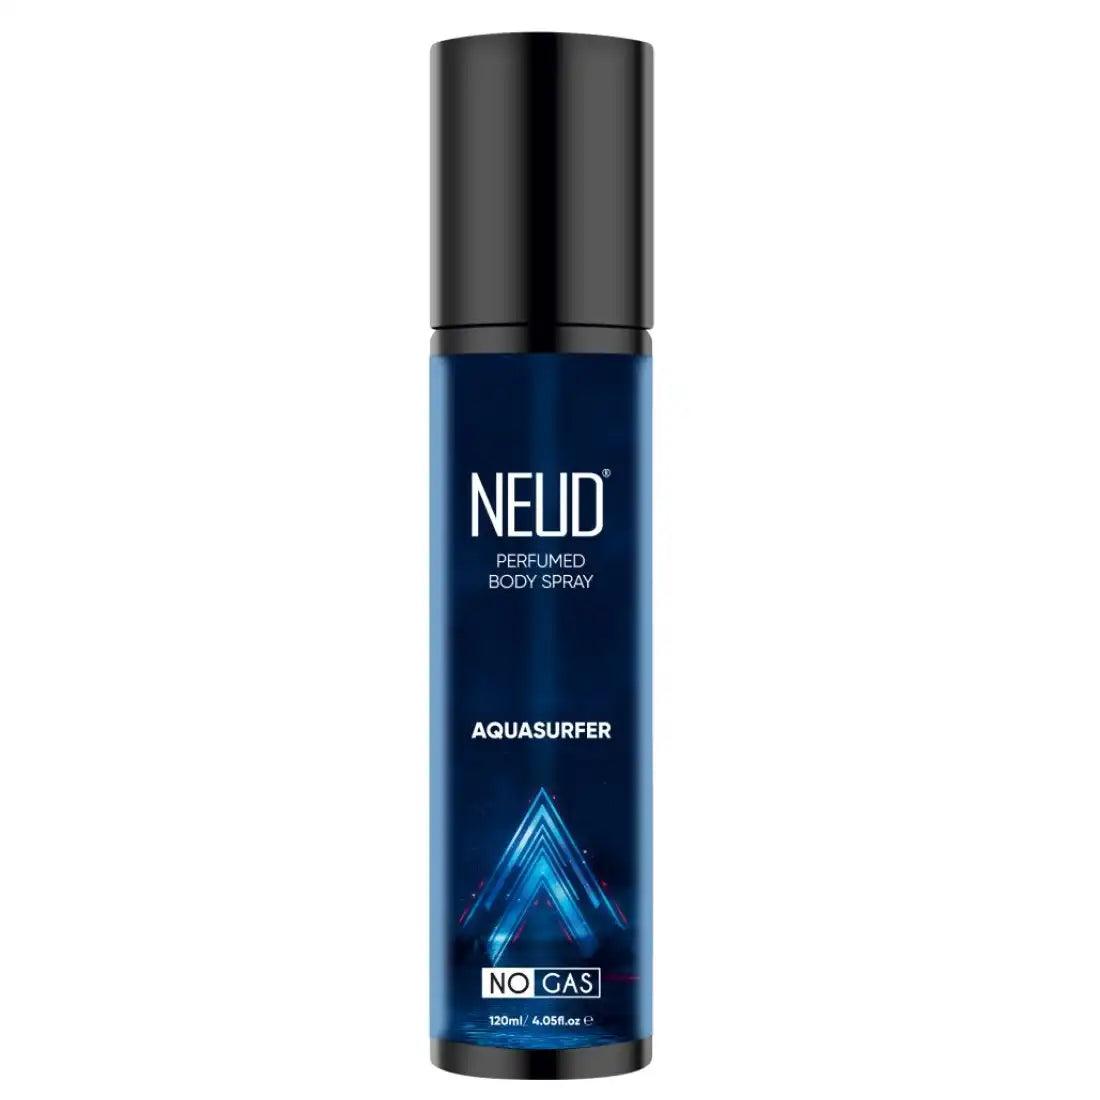 NEUD Aquasurfer Perfumed Body Spray for Men, No Gas Deodorant with Long-Lasting Fragrance, 120ml - Official Brand Store: everteen | NEUD | Nature Sure | ManSure